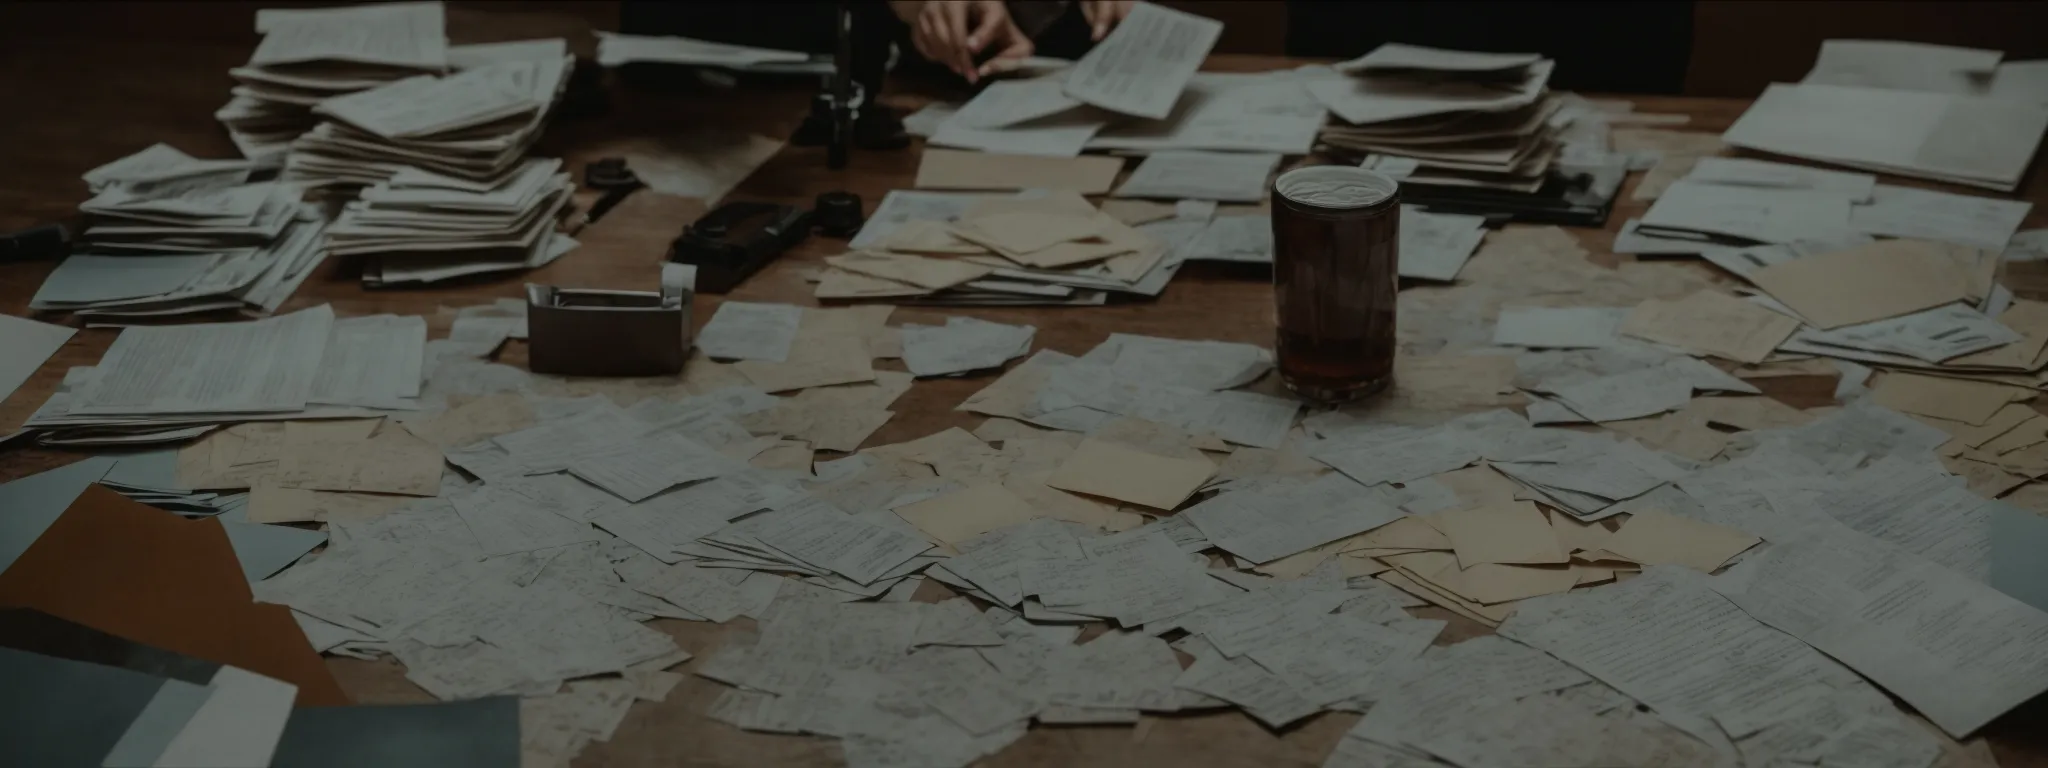 a professional scrutinizing a scattered array of faded documents spread across a desk, symbolizing the evaluation of dated website content.